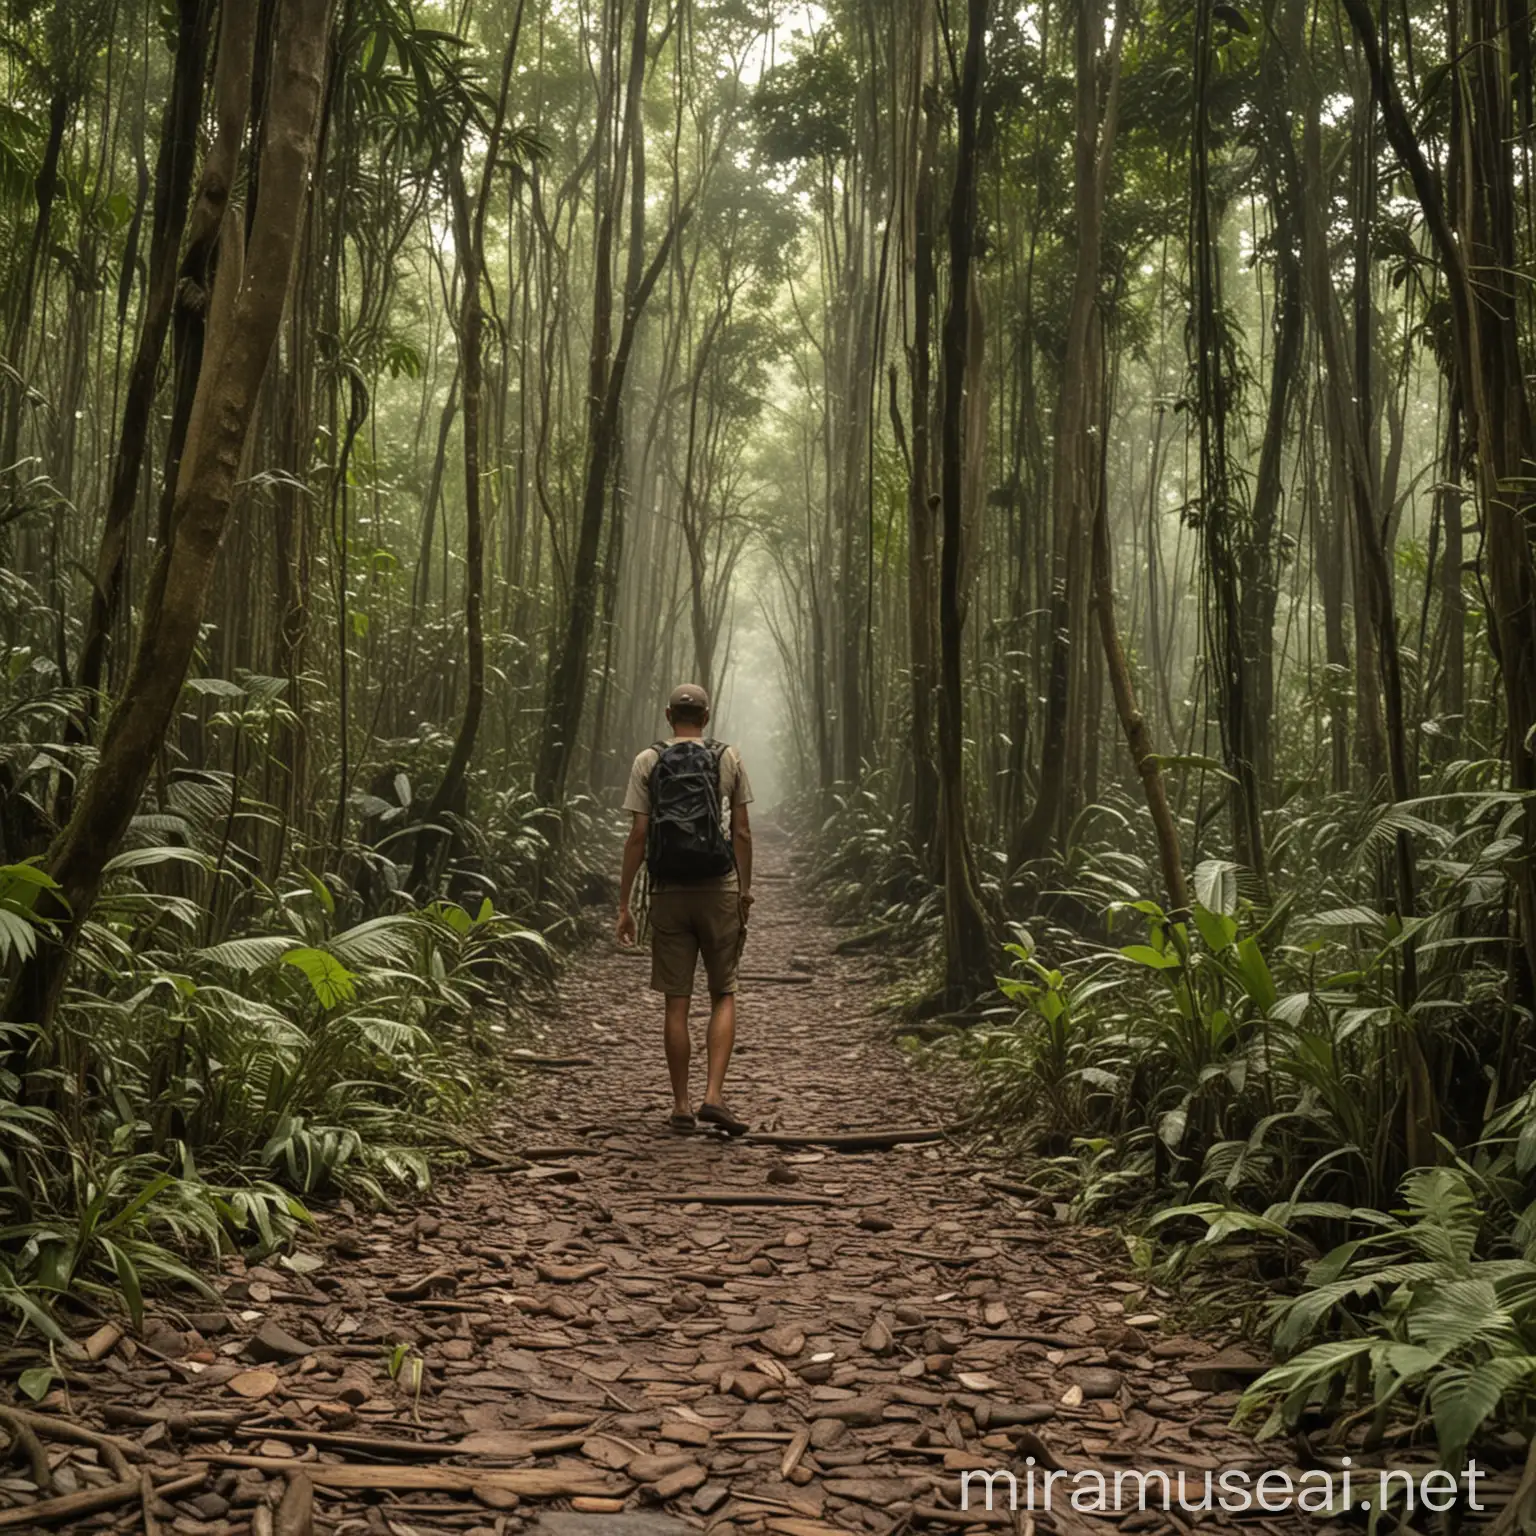 Exploring the Amazon Rainforest A Journey Through the Lungs of the Earth